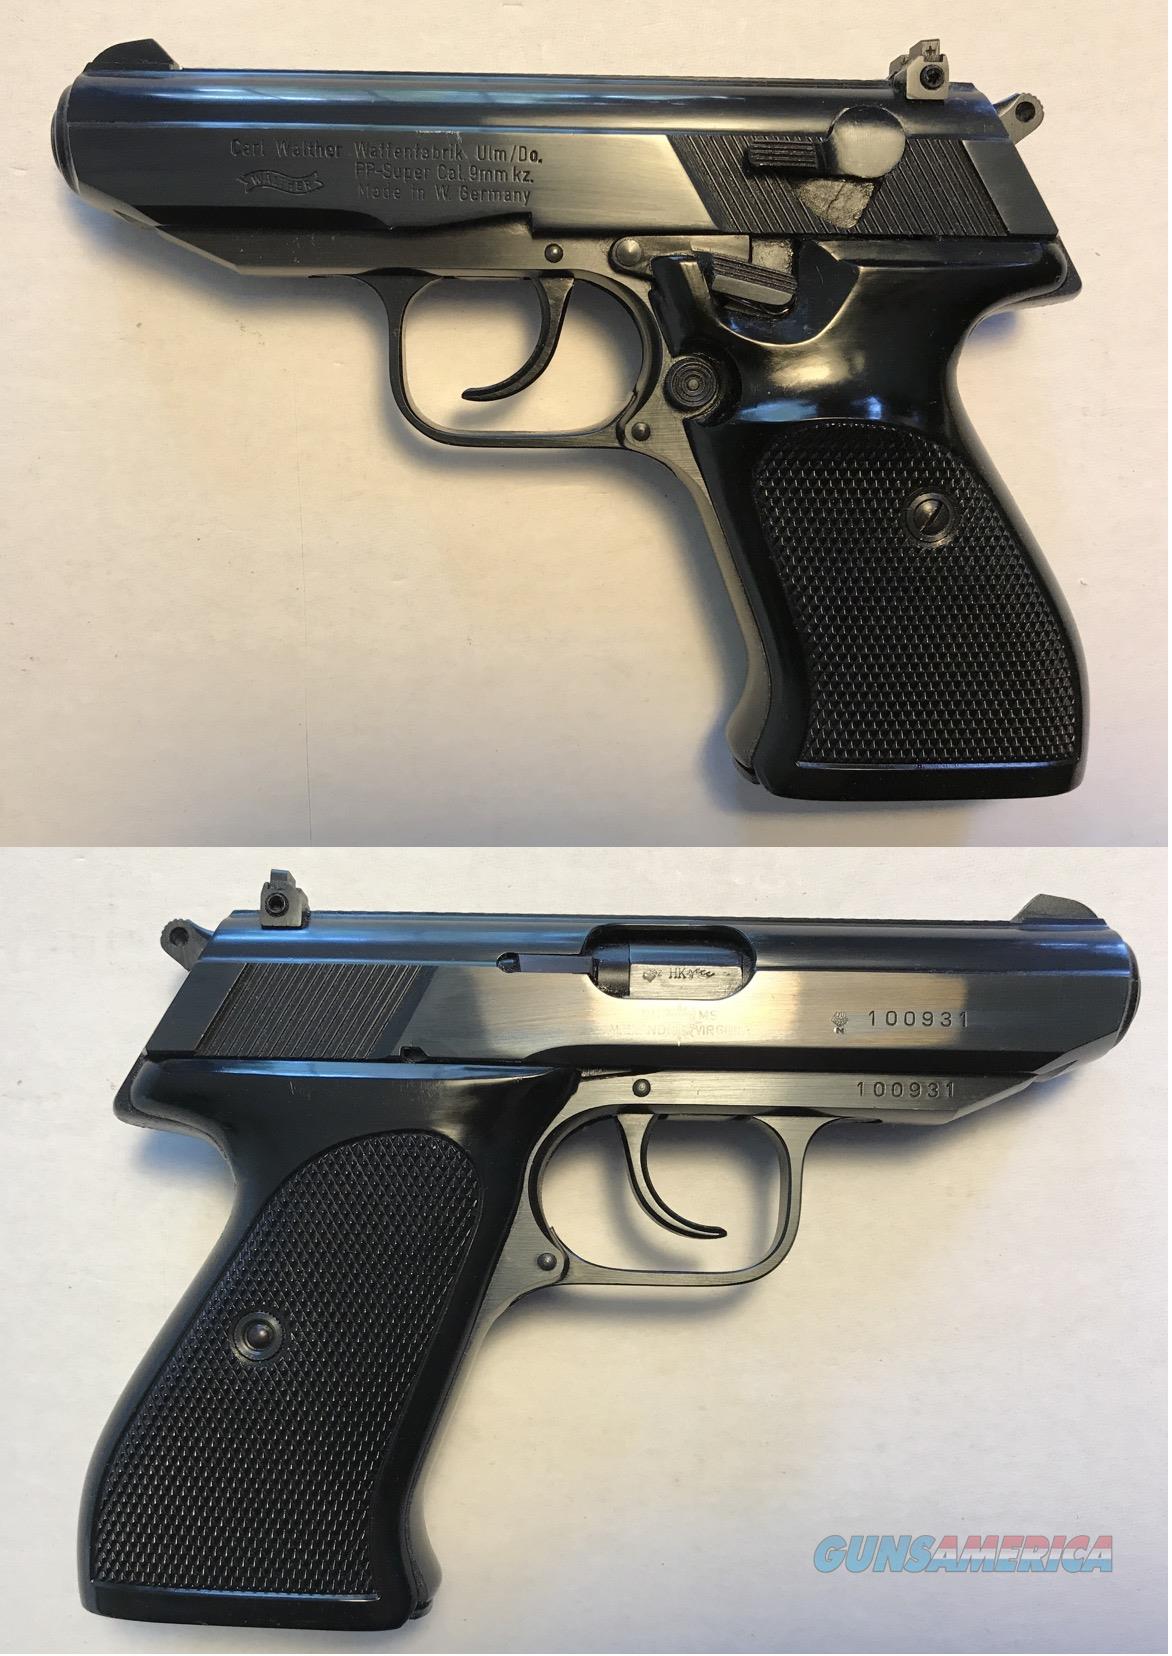 Walther ppk serialization